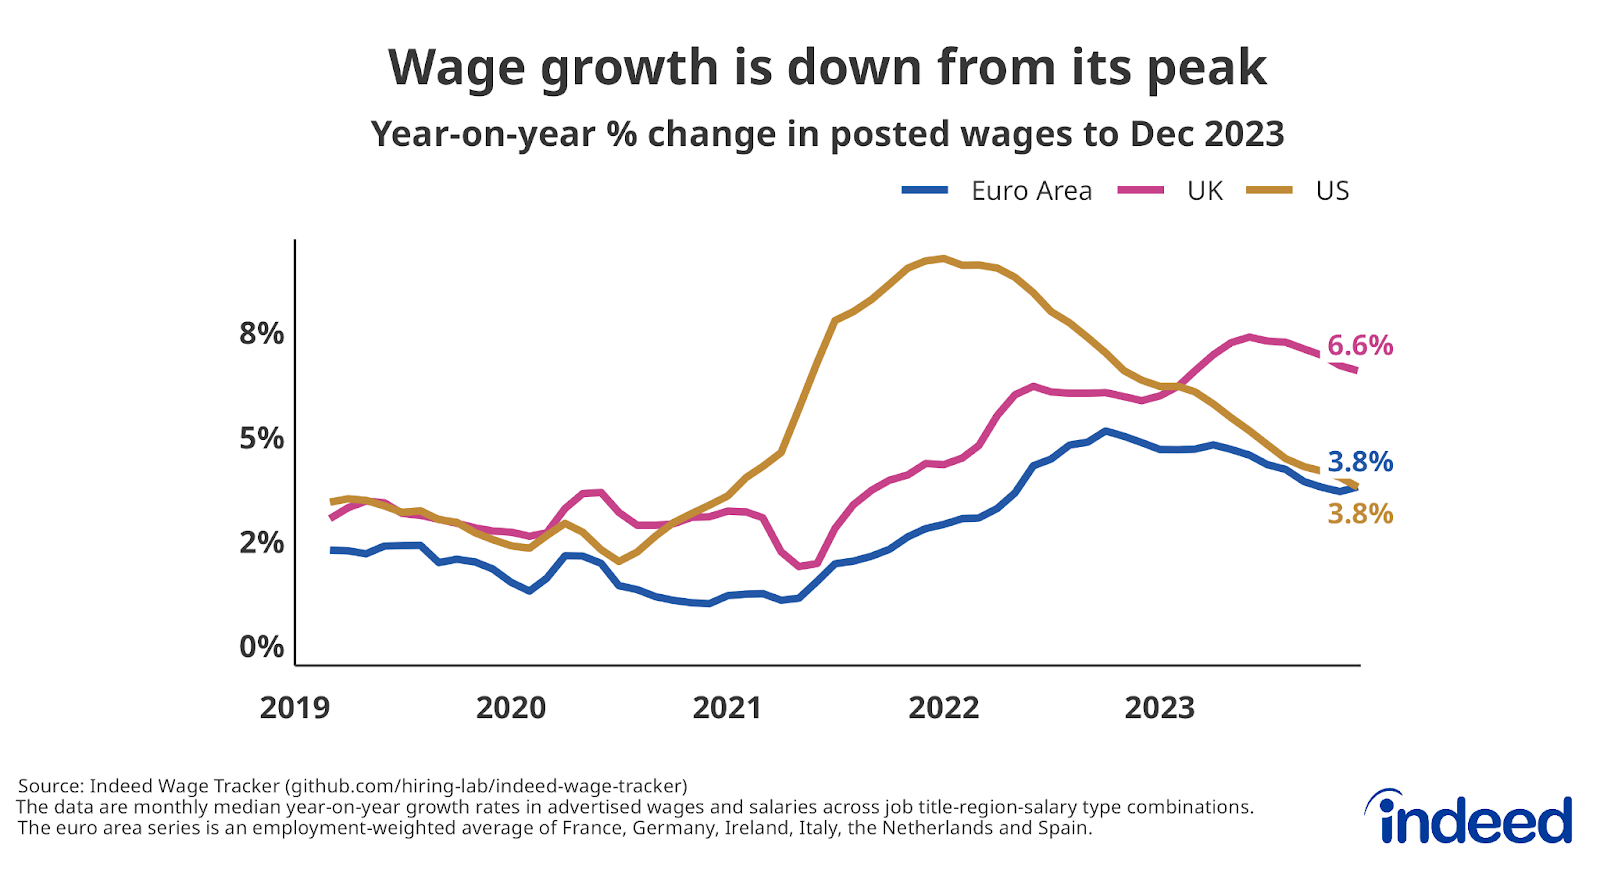 Line chart titled “Wage growth is down from its peak." With a y-axis range of 0% to 8% and an x-axis range from 2019 to 2023, the chart shows the yearly percentage change in nominal wages in job postings for the euro area, the UK, and the US to December 2023.